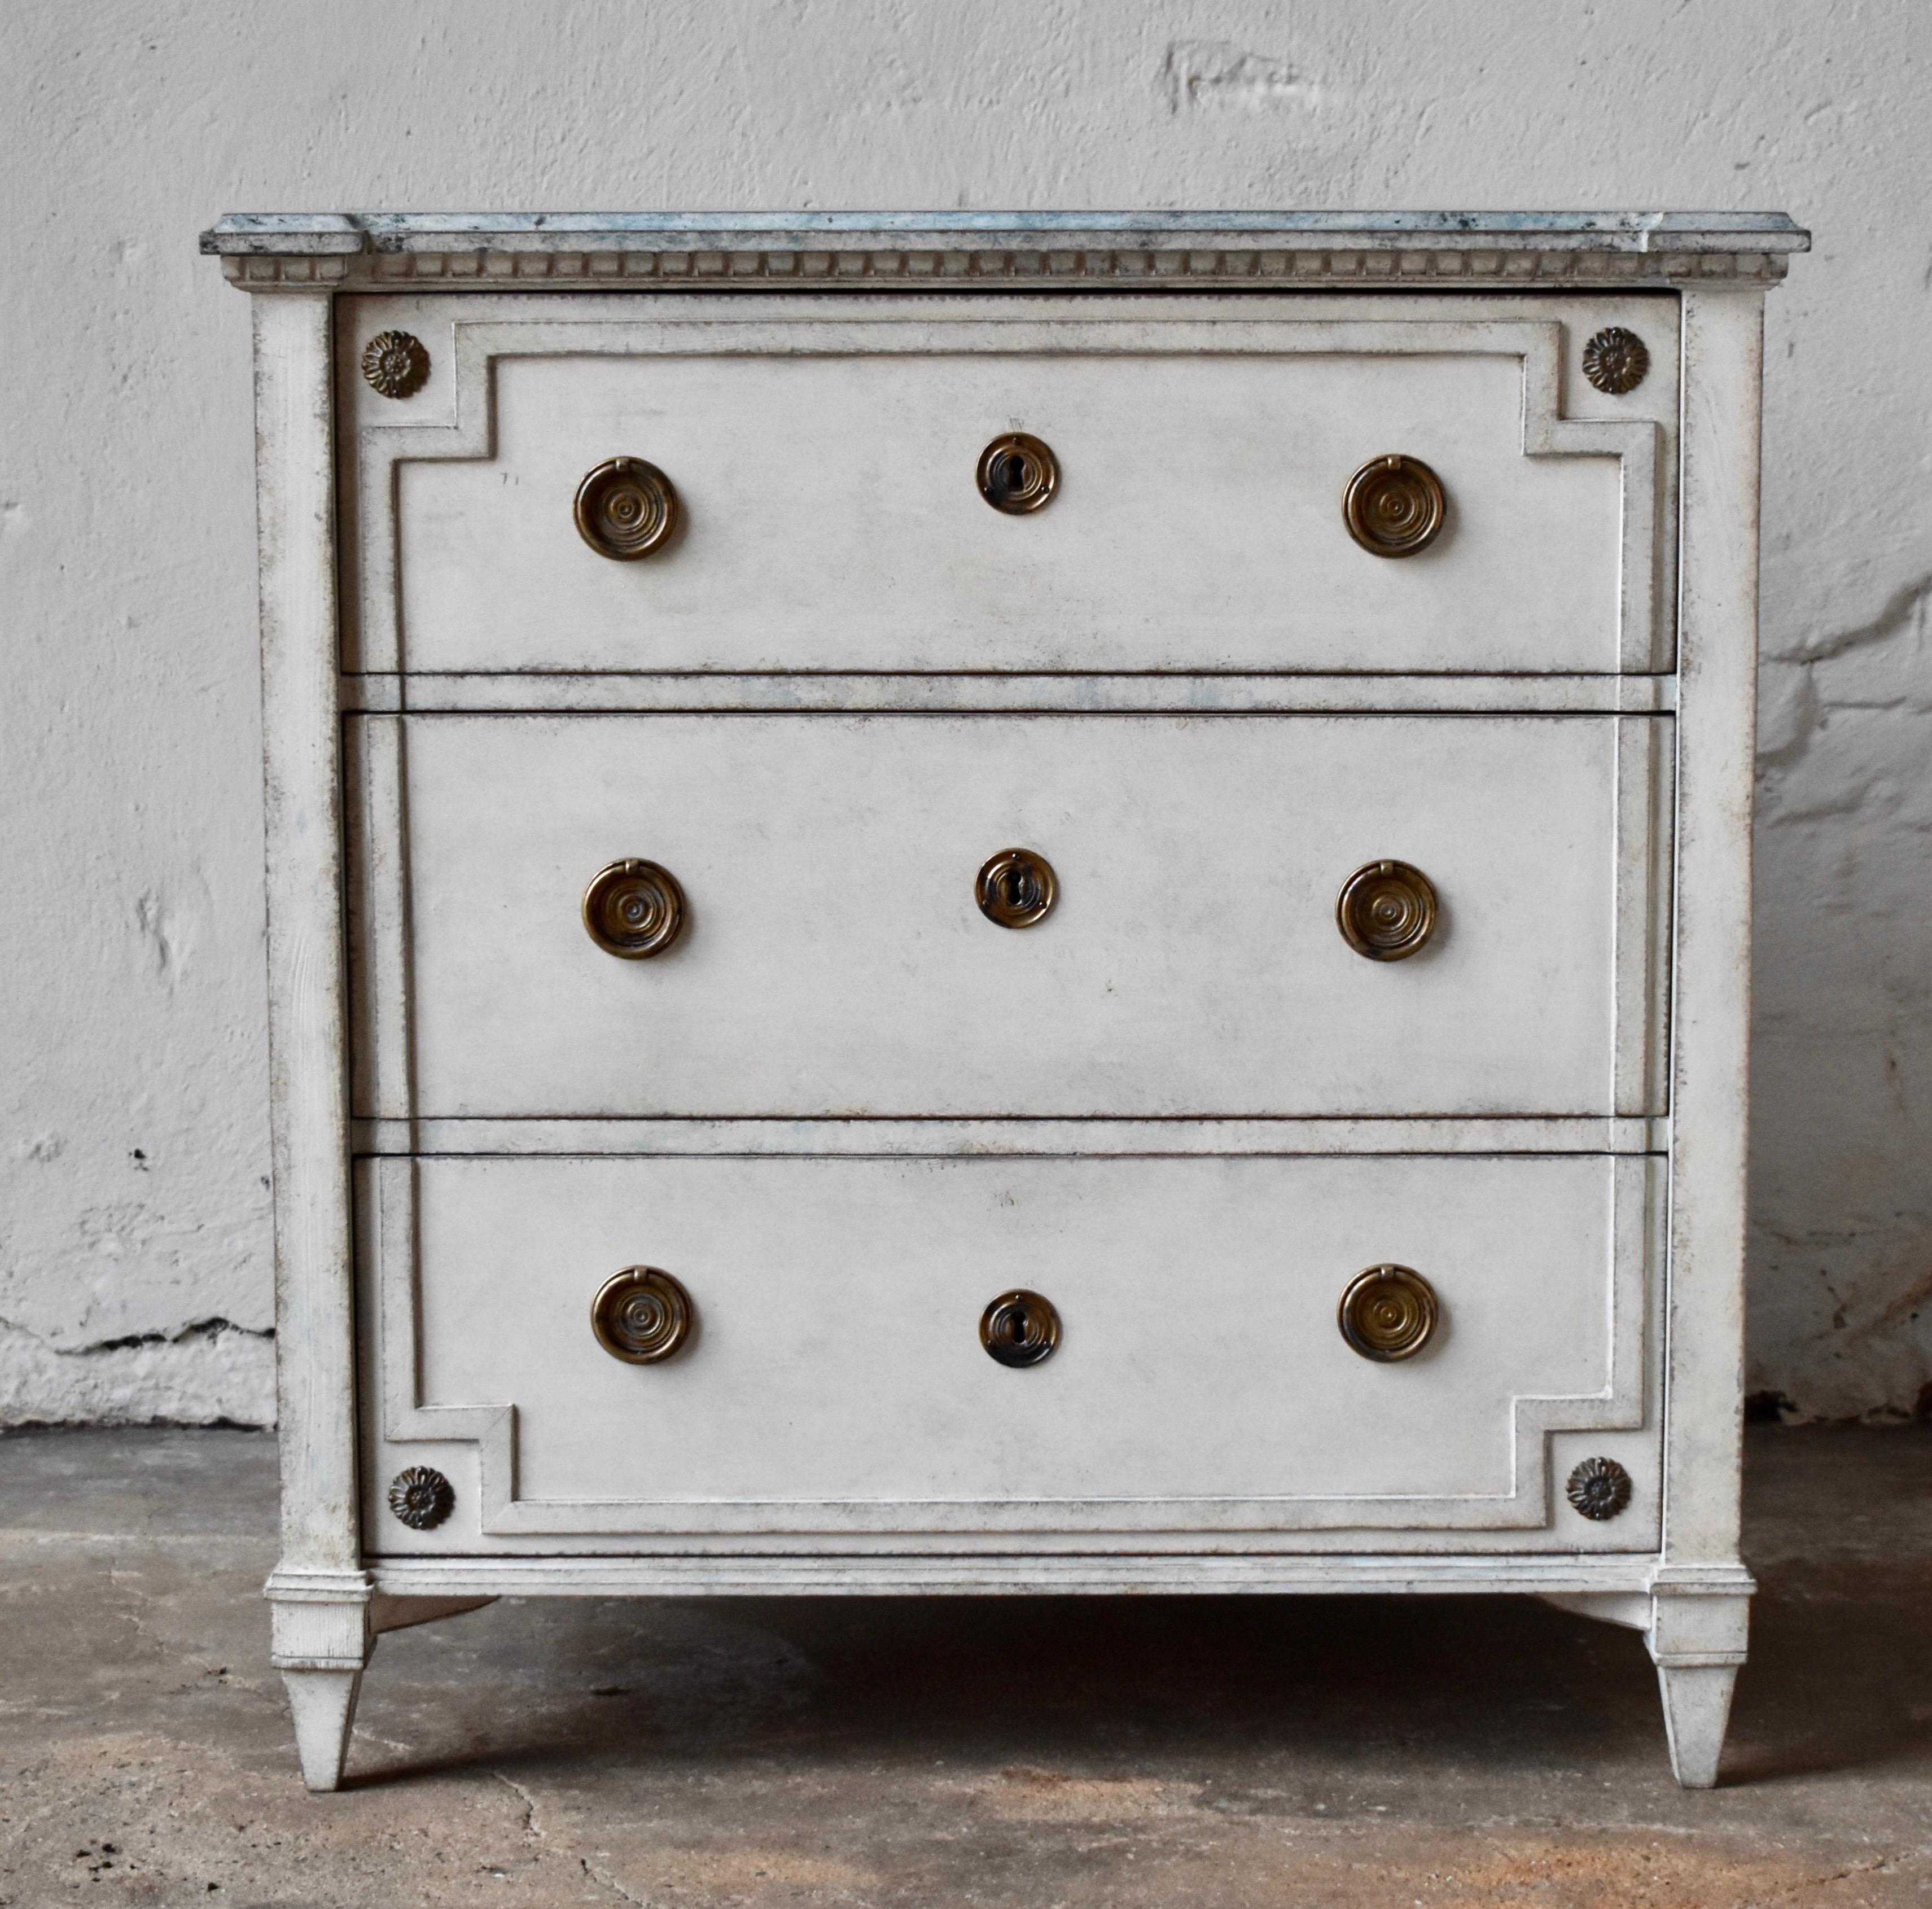 19th century Swedish Gustavian style chest of drawer
Excellent patina.